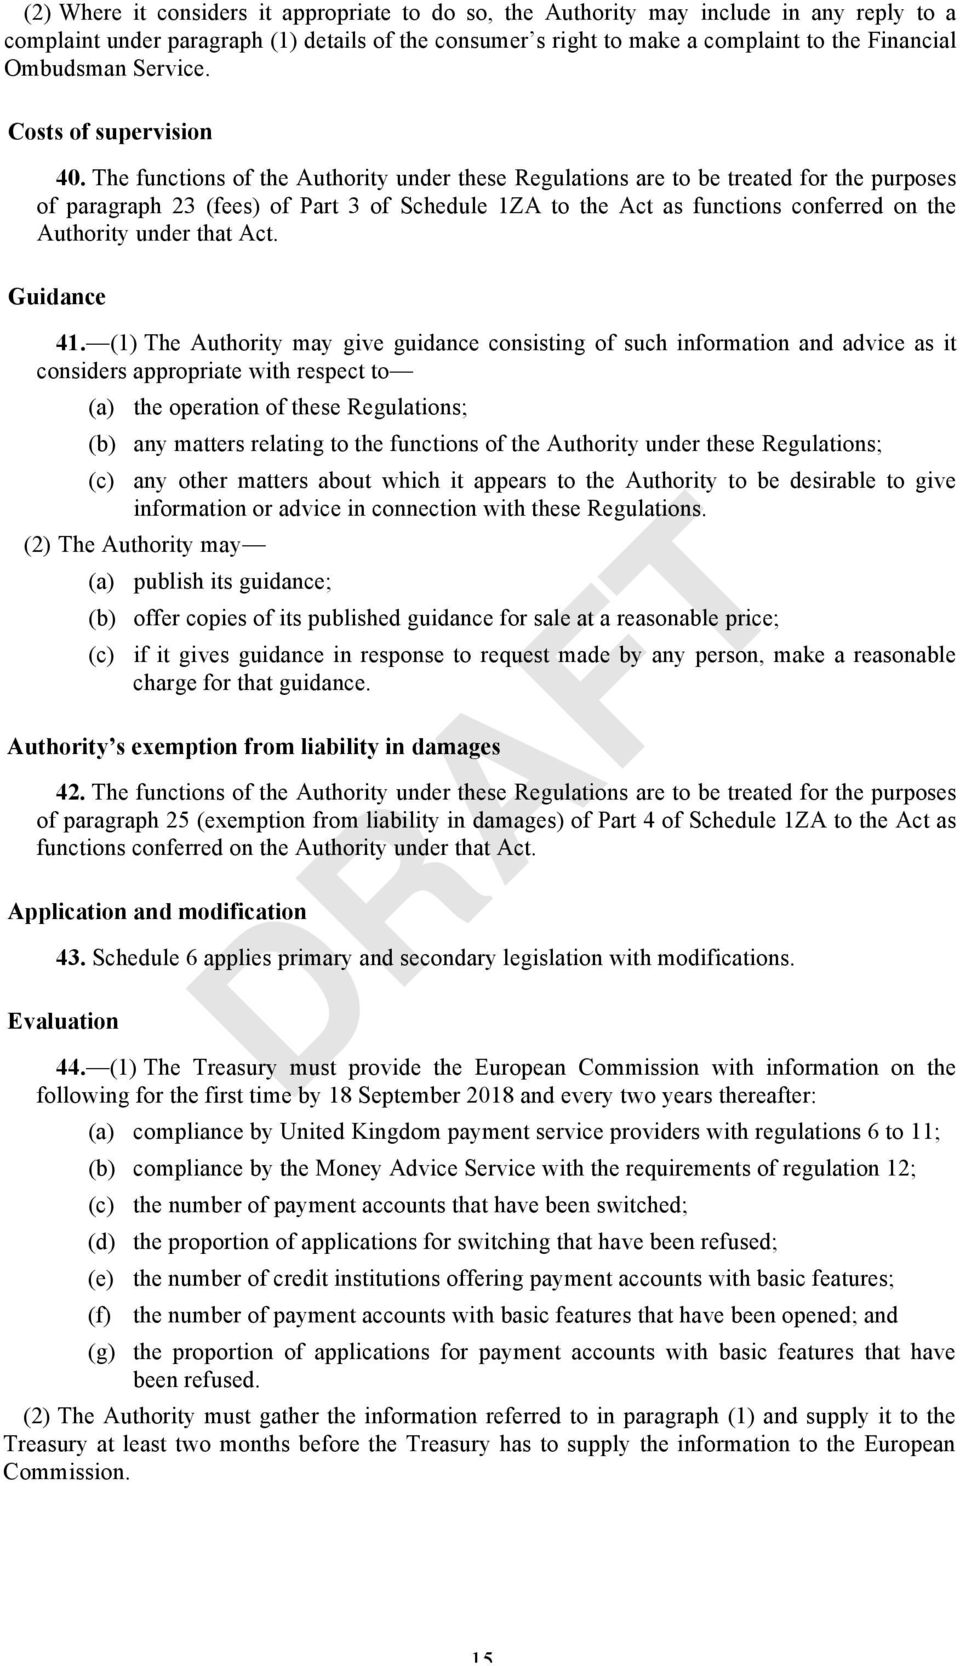 The functions of the Authority under these Regulations are to be treated for the purposes of paragraph 23 (fees) of Part 3 of Schedule 1ZA to the Act as functions conferred on the Authority under